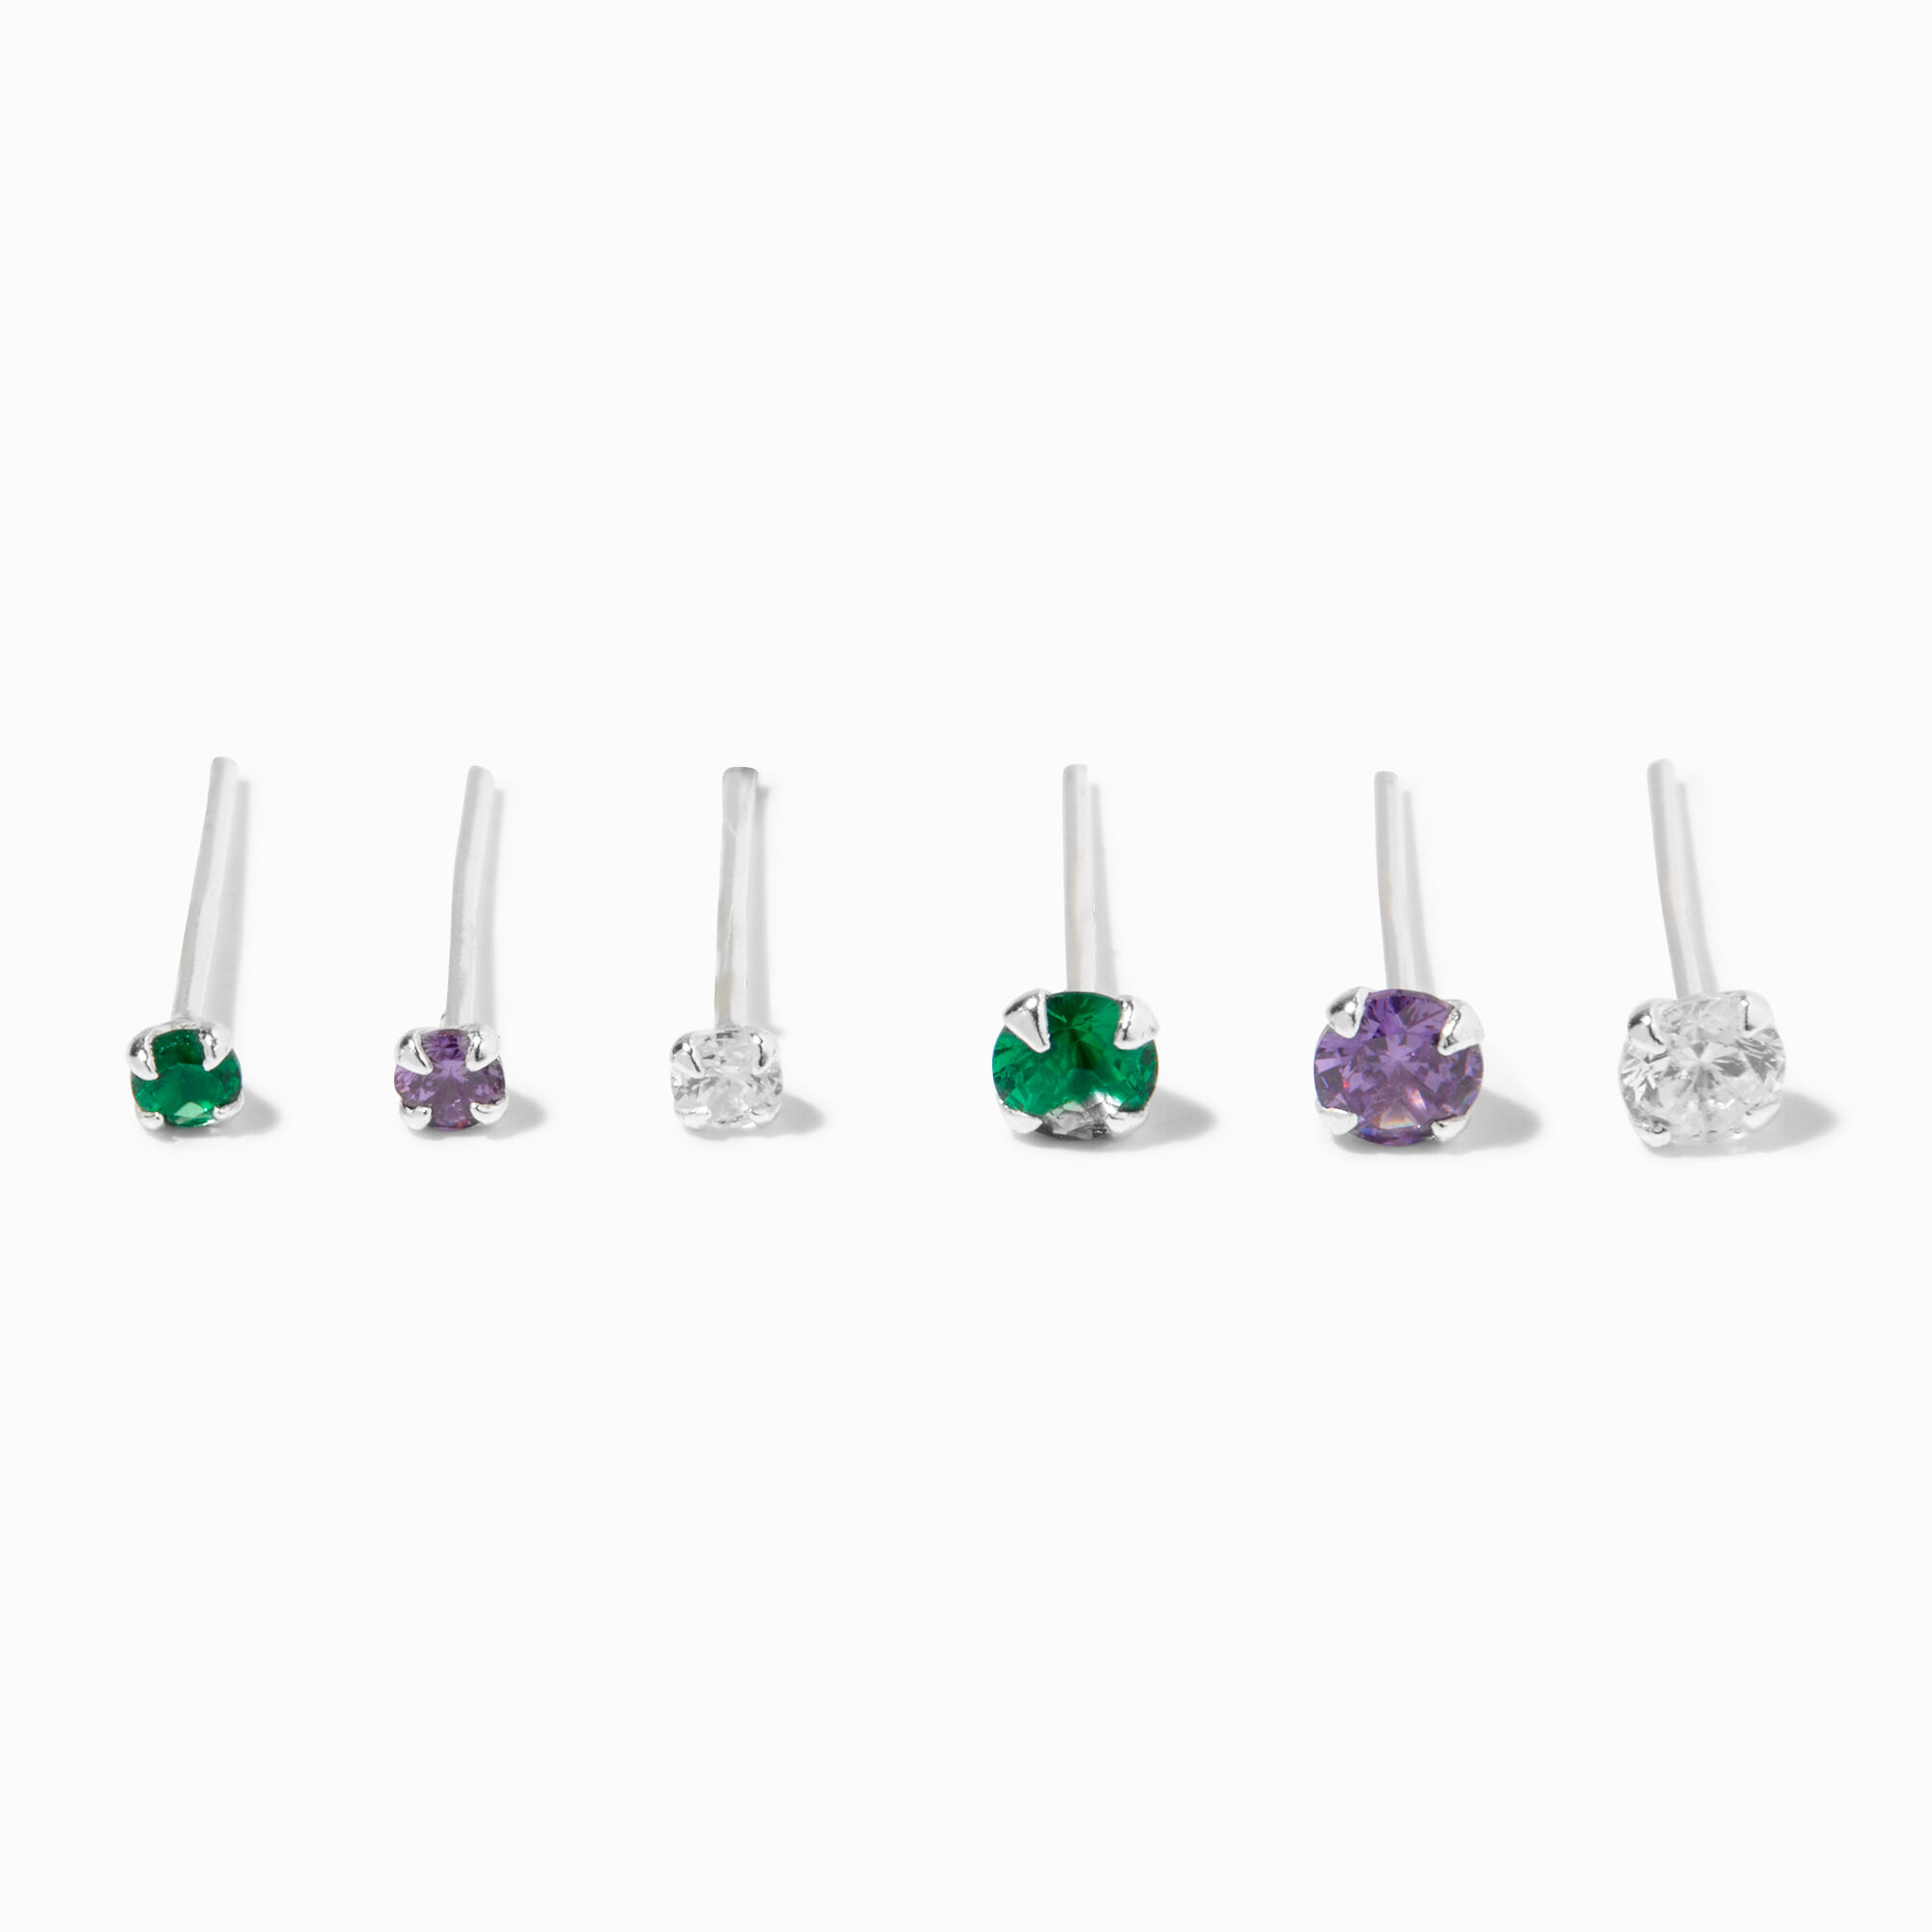 View Claires 22G Jewel Tone Cubic Zirconia Nose Stud Set 6 Pack Silver information